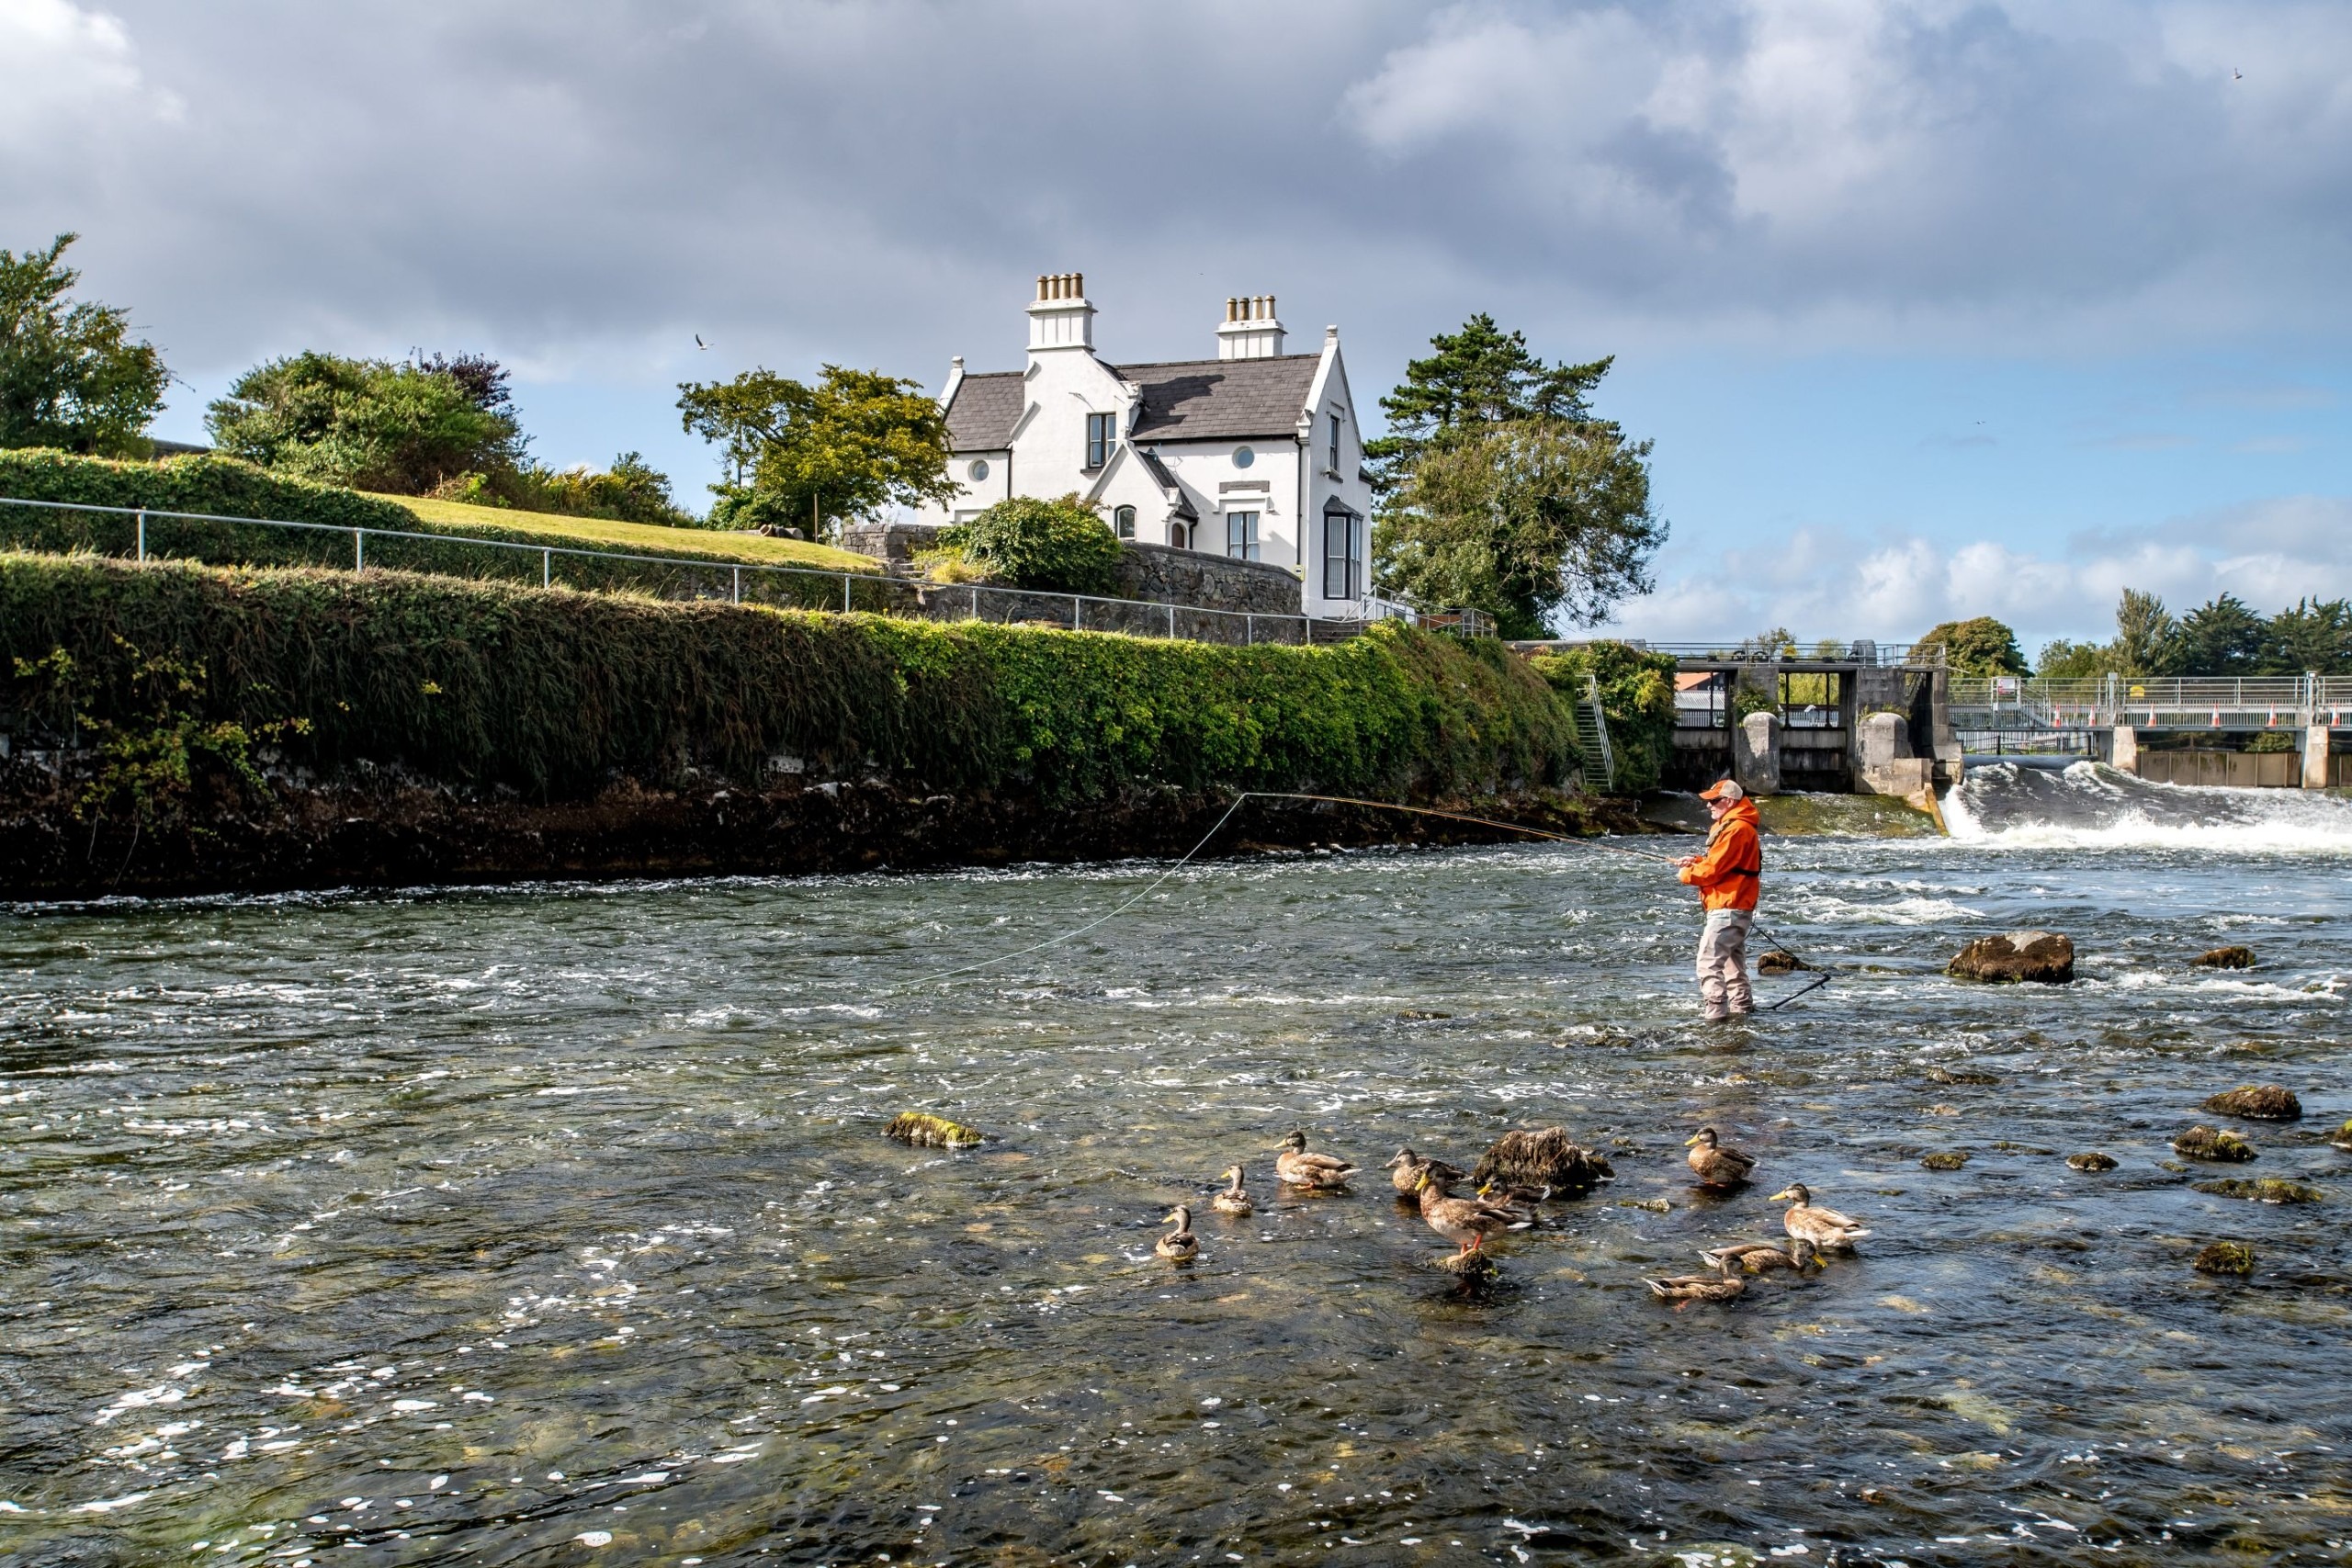 The Great Fishing Houses of Ireland